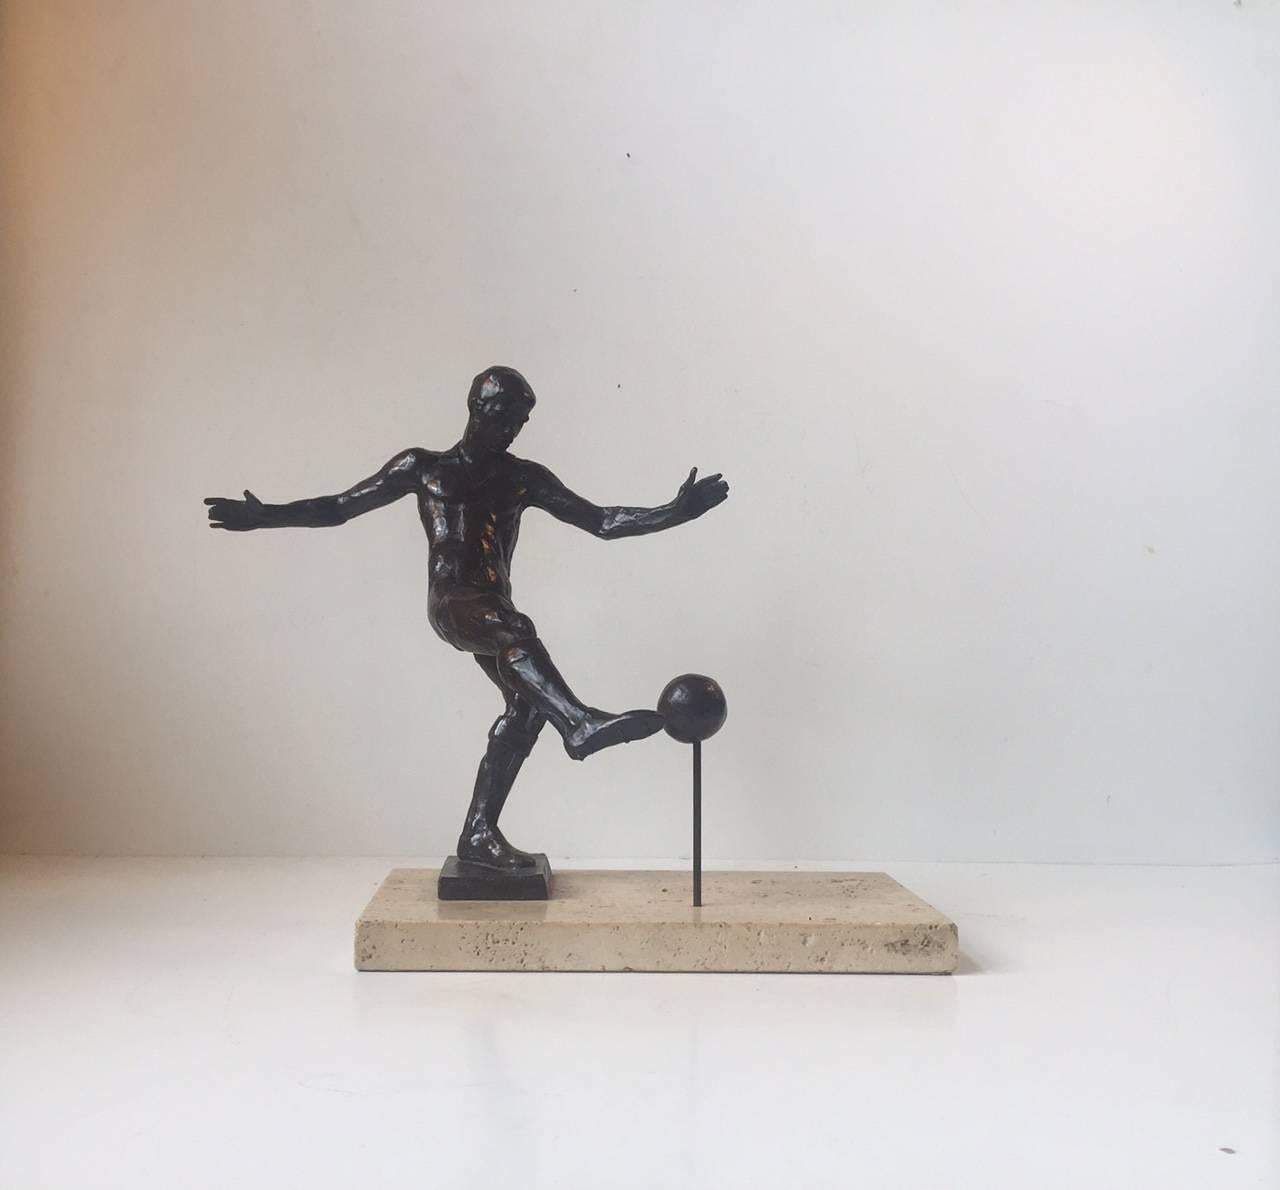 Detailed bronze sculpture depicting football player kicking to the ball. It is mounted on an Italian travertine base. It is commissioned by Royal Copenhagen in Denmark relation to the Olympic Games in Montreal in 1976. The sculptor is